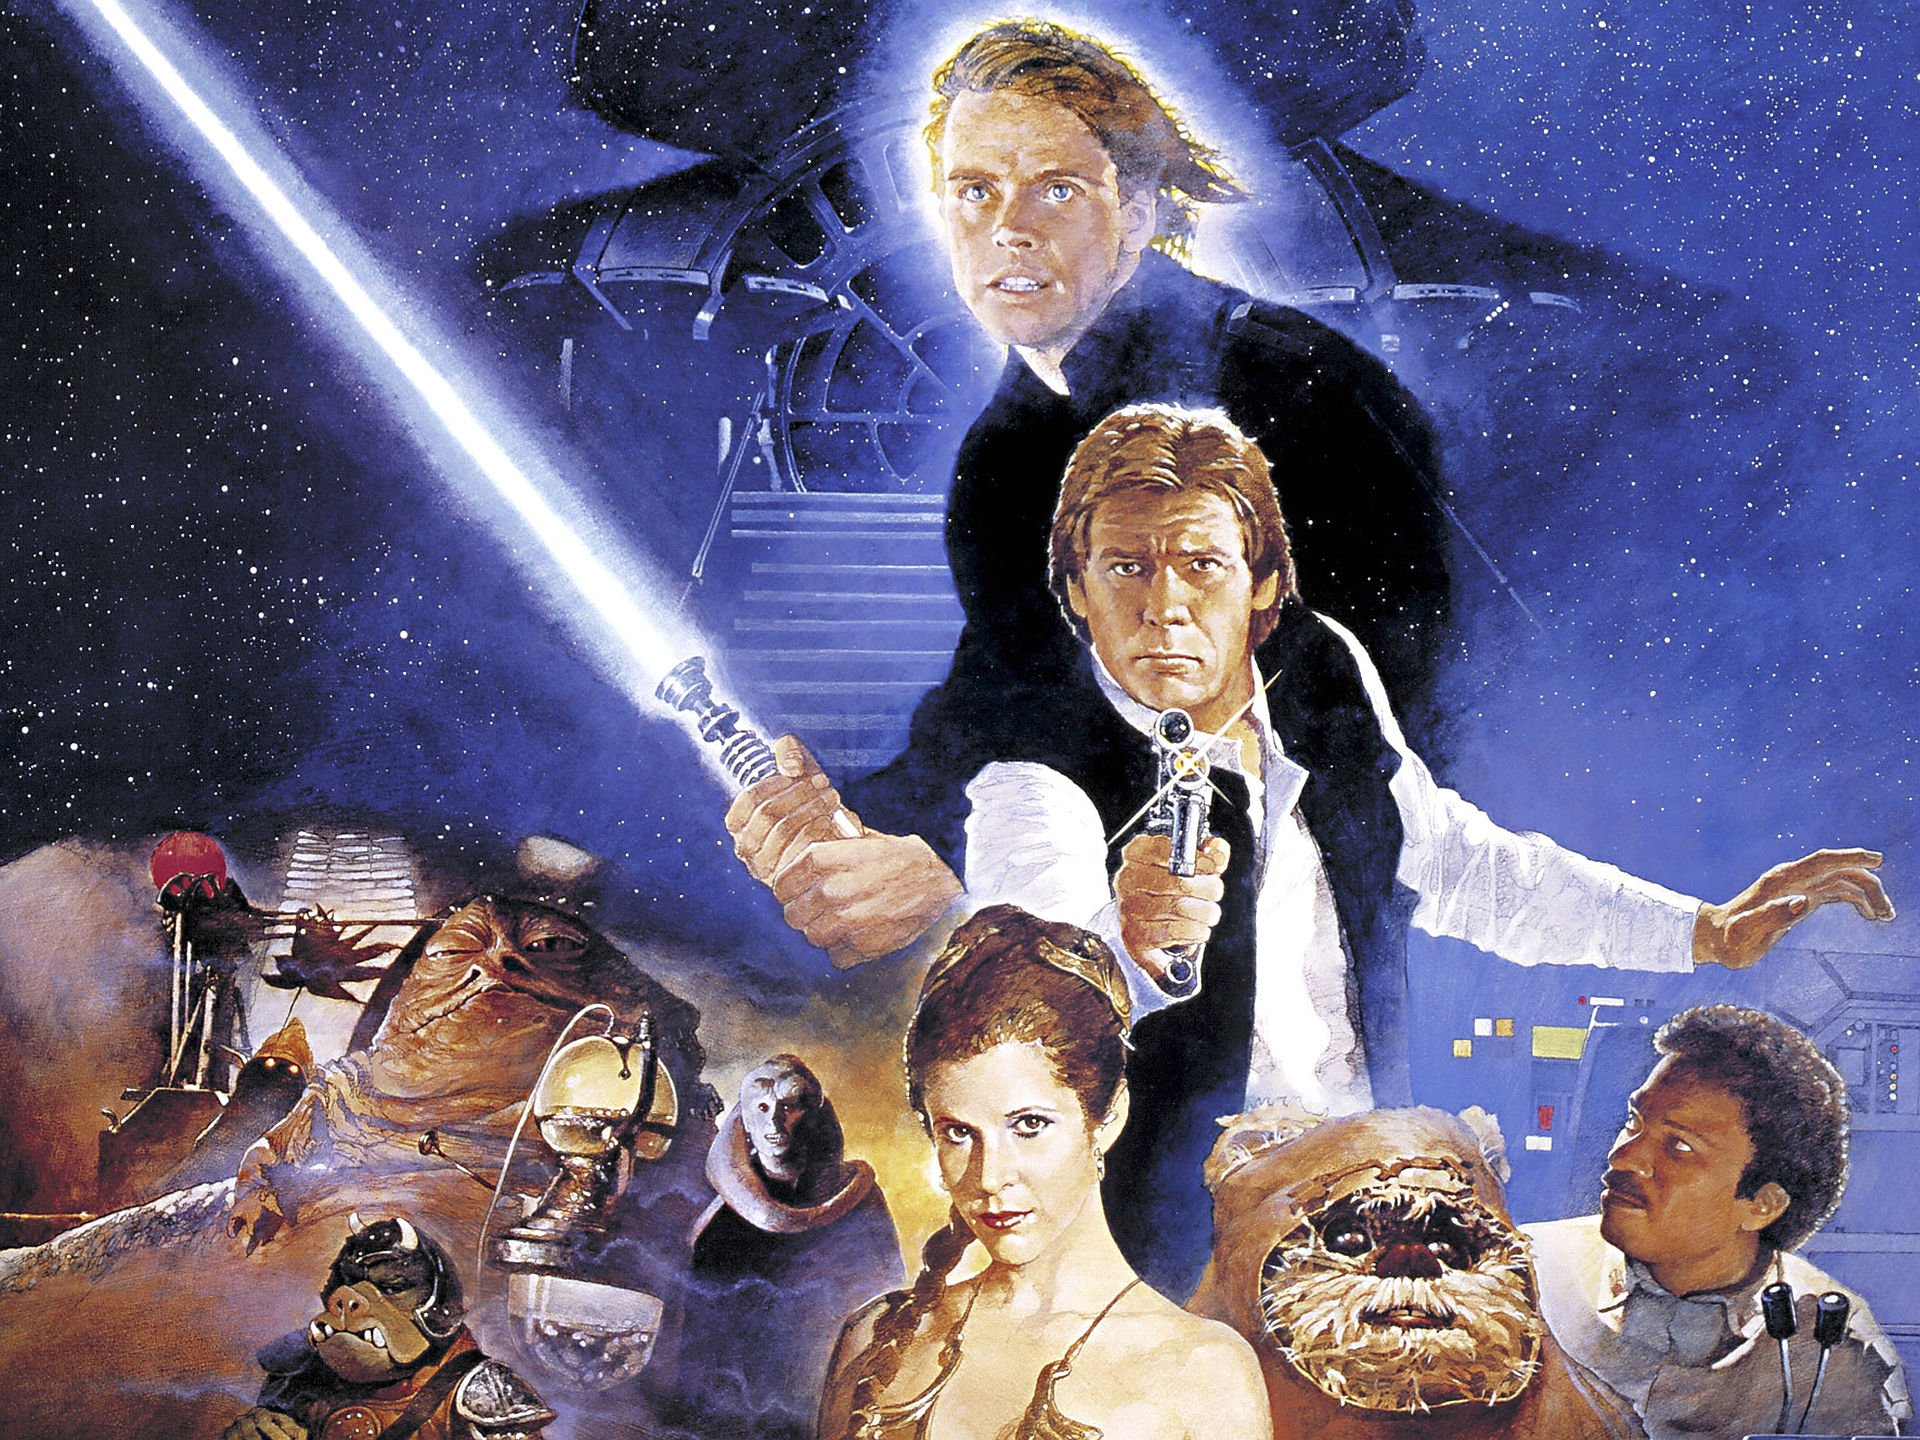 star wars 1977 full movie online for free hd 1080